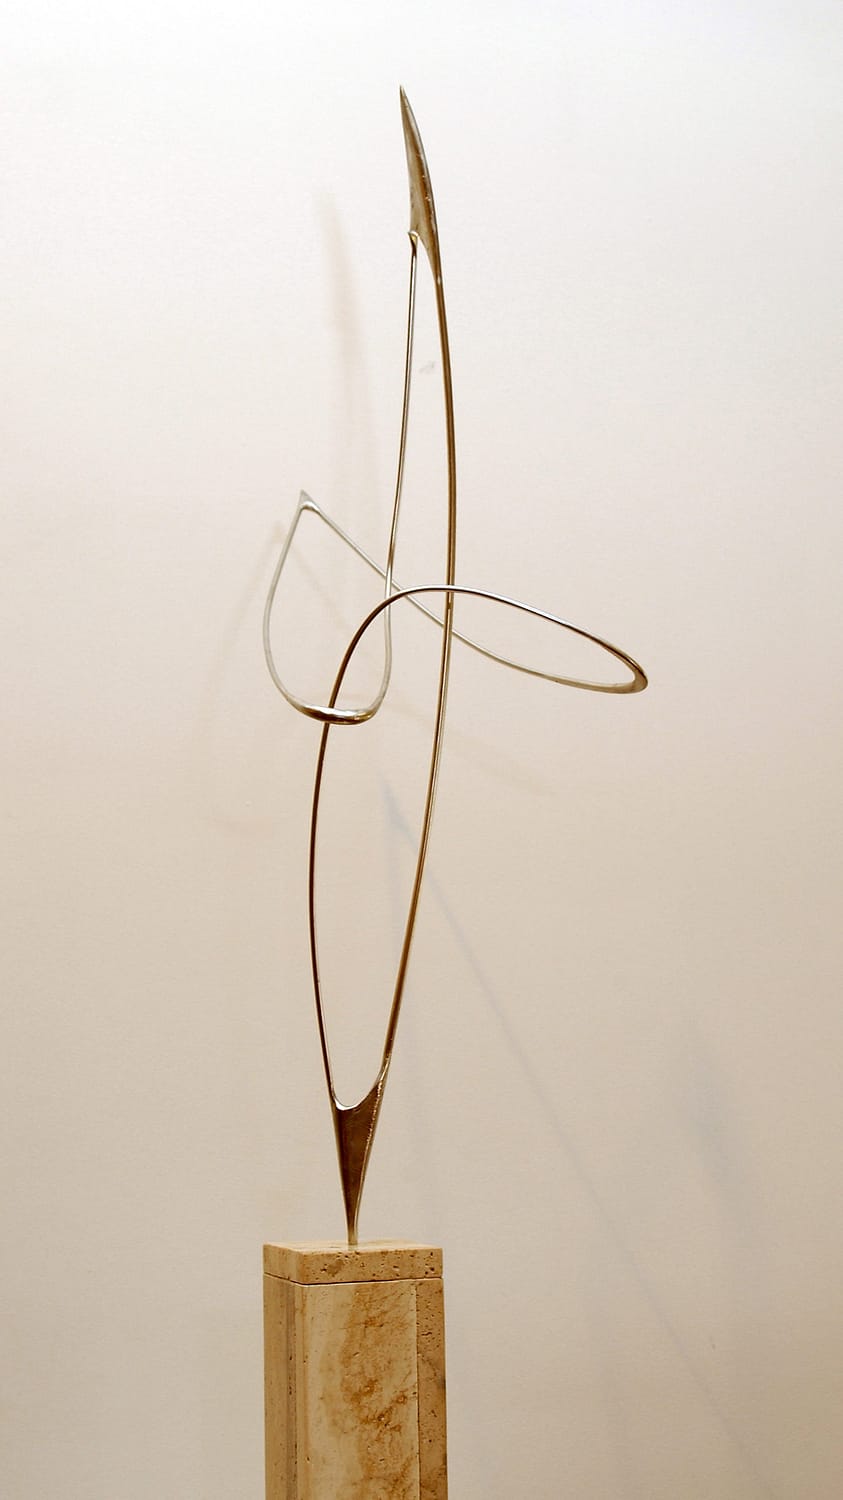 Southern Cross series maquette, 2000, stainless steel wire